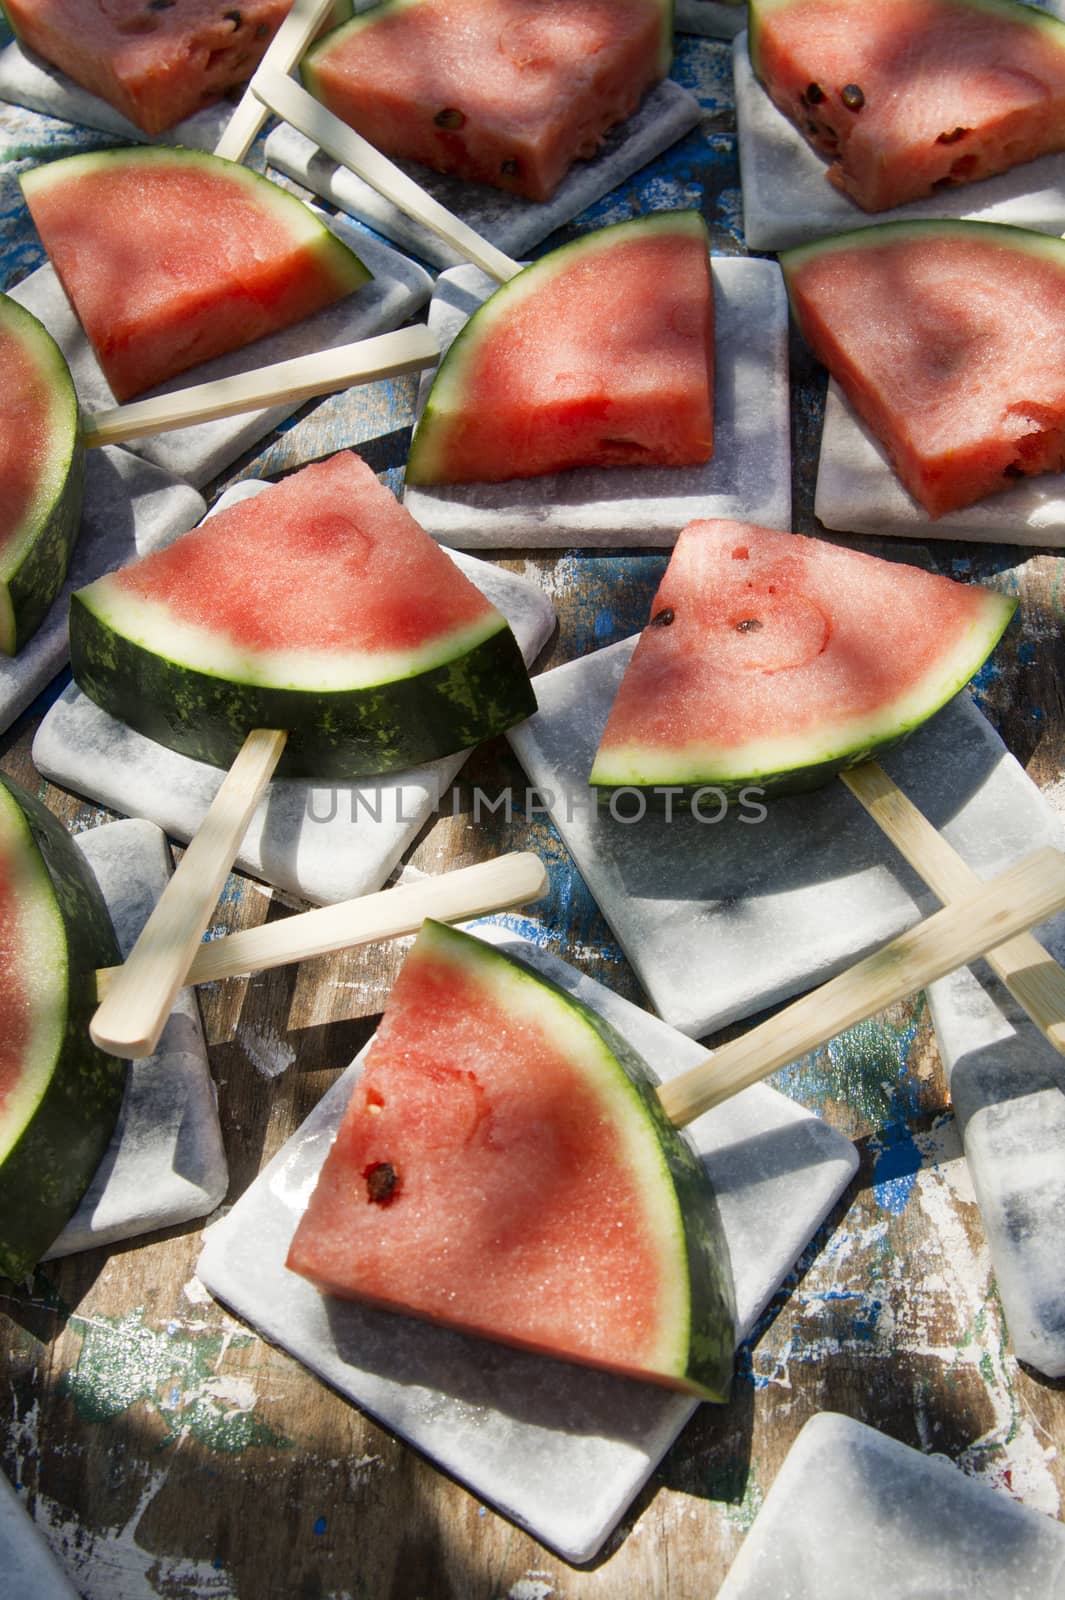 Presentation of a summer dish made up of slice of watermelon 